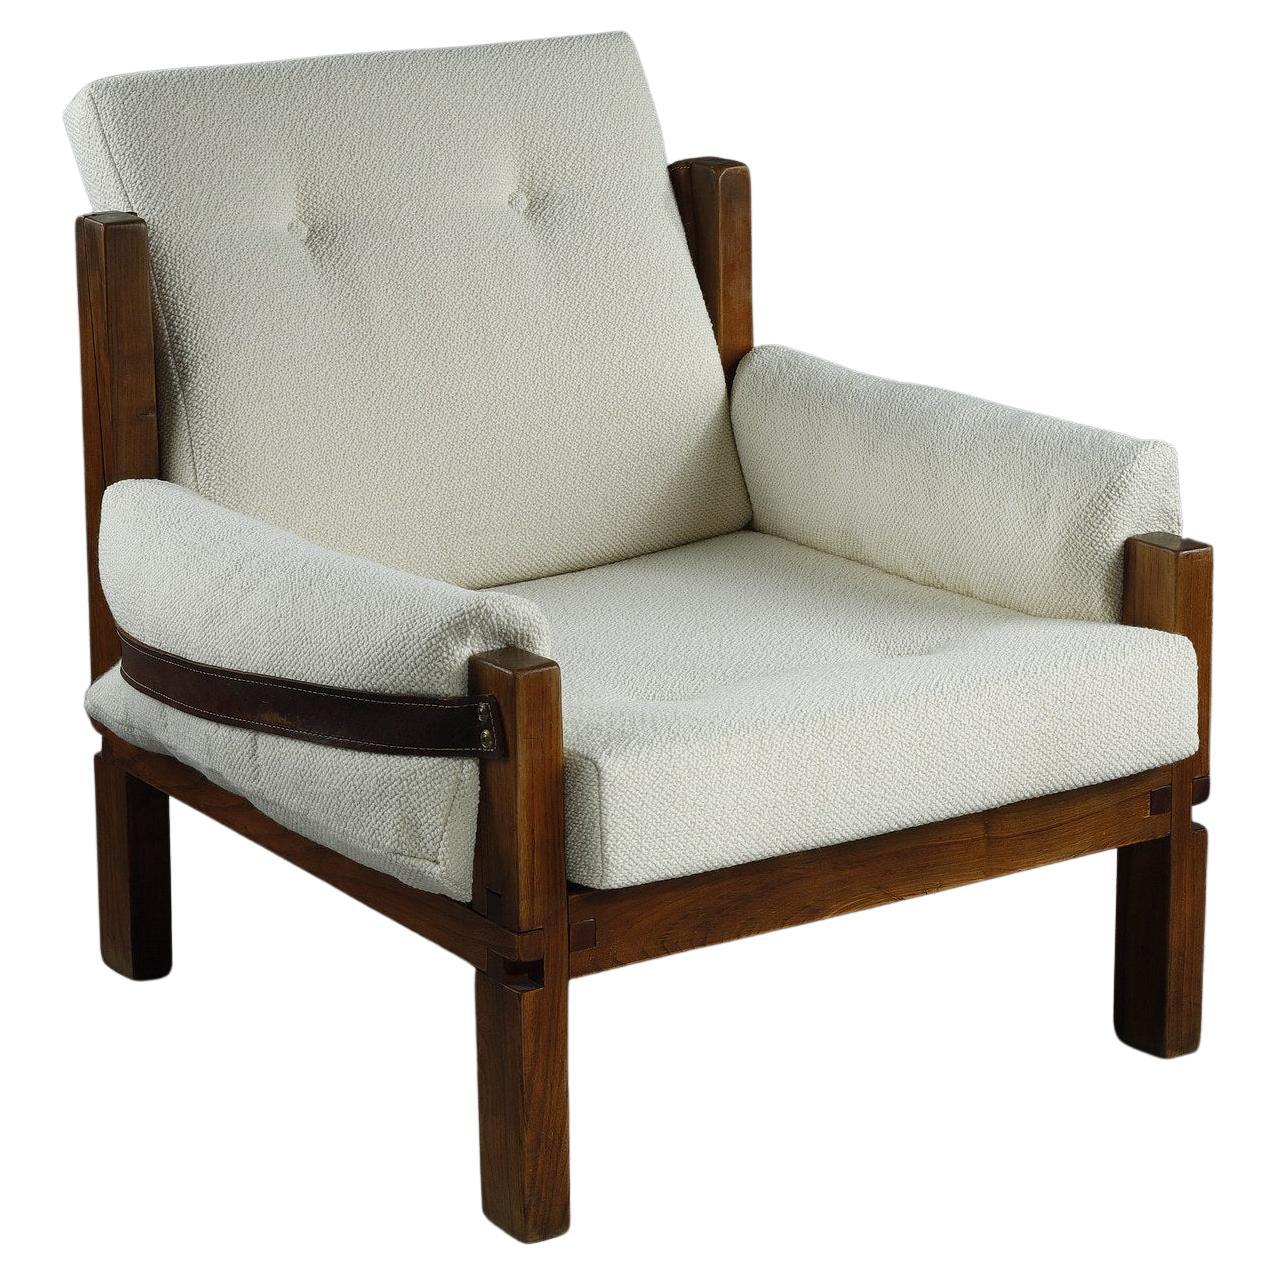 Armchair by Pierre CHAPO from the 1970s, S15 MODEL For Sale